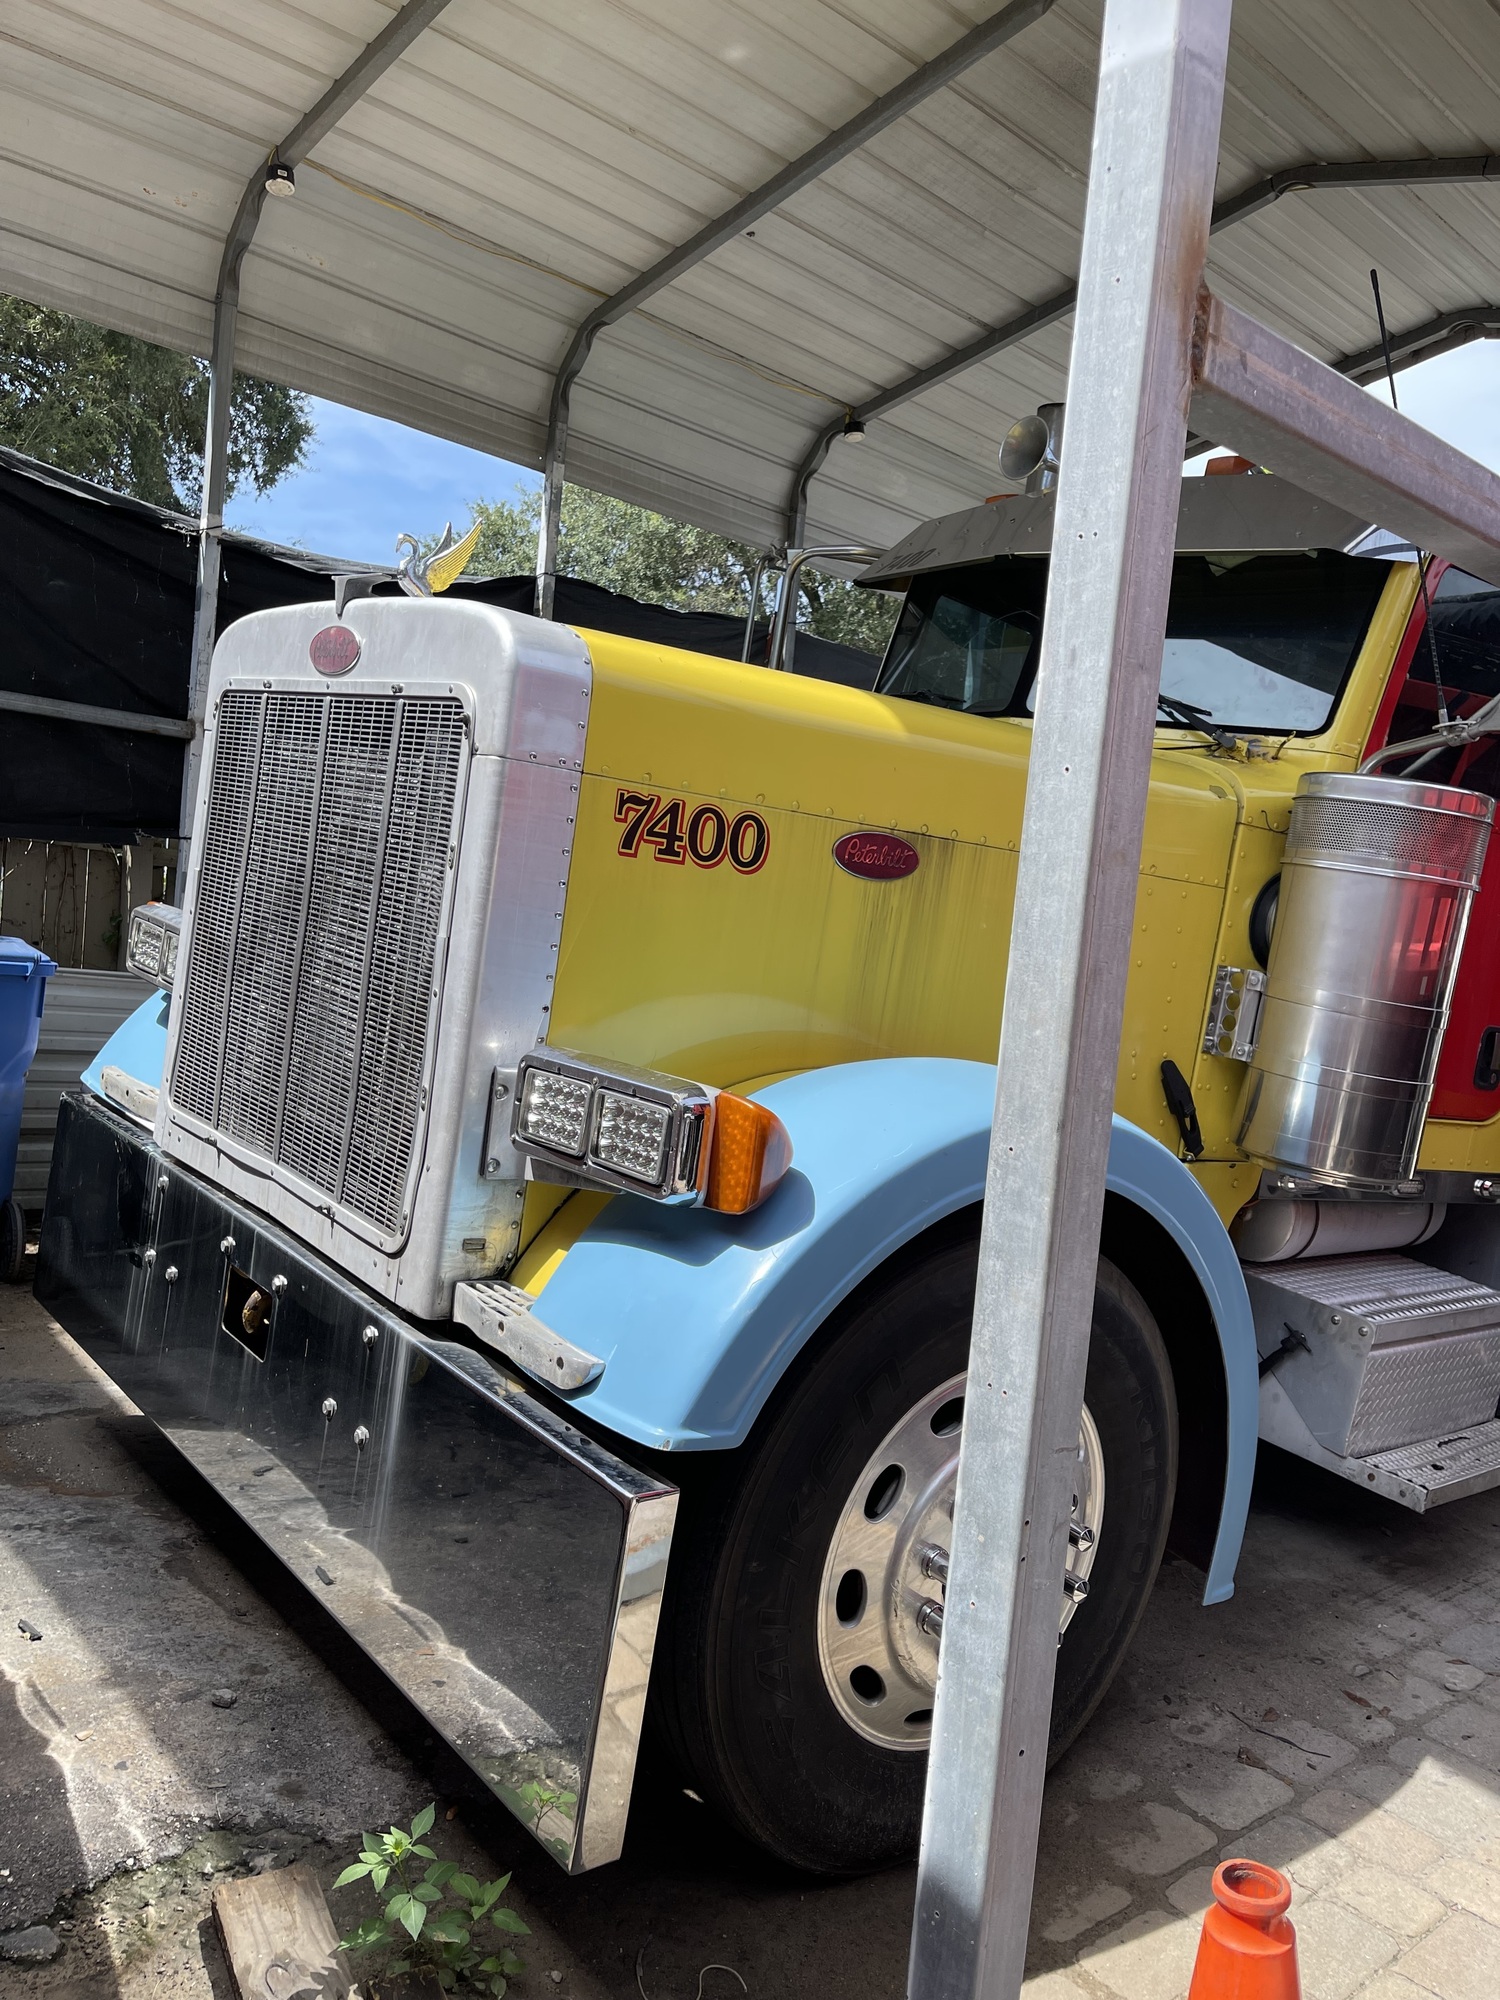 1990 PETERBILT 379 HEAVY DUTY TRUCK WITH CONVENTIONAL SLEEPER | Iron Listing